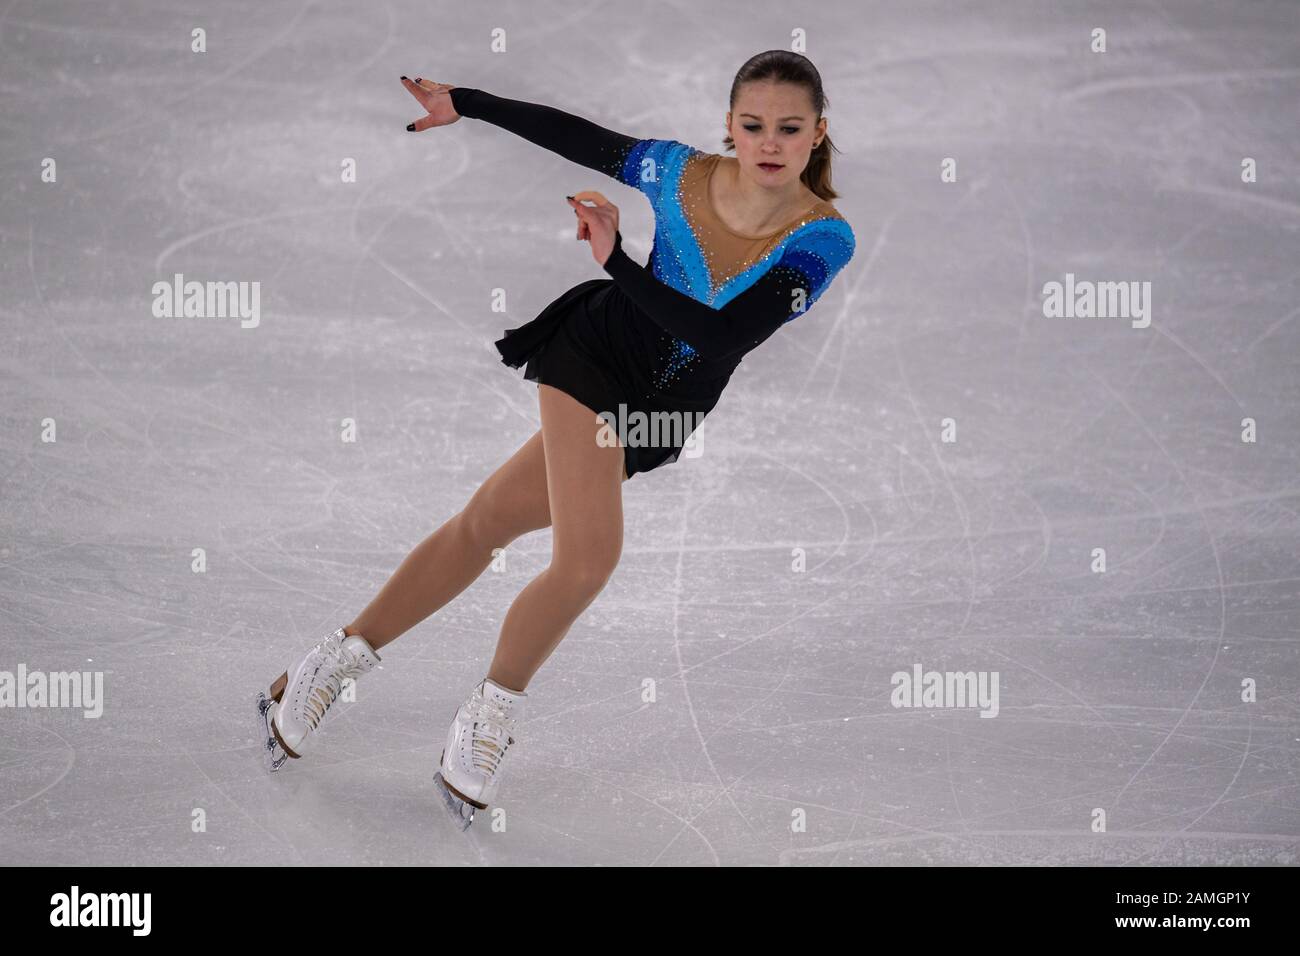 Lausanne, Switzerland. 13th, Jan 2020 RYABOVA Ekaterina (AZE) competes in Figure Skating Women Free Dance during the Lausanne 2020 Youth Olympic Games at Vaudoise Arena on Monday, 13 January 2020. Lausanne, Switzerland. Credit: Taka G Wu/Alamy Live News Stock Photo